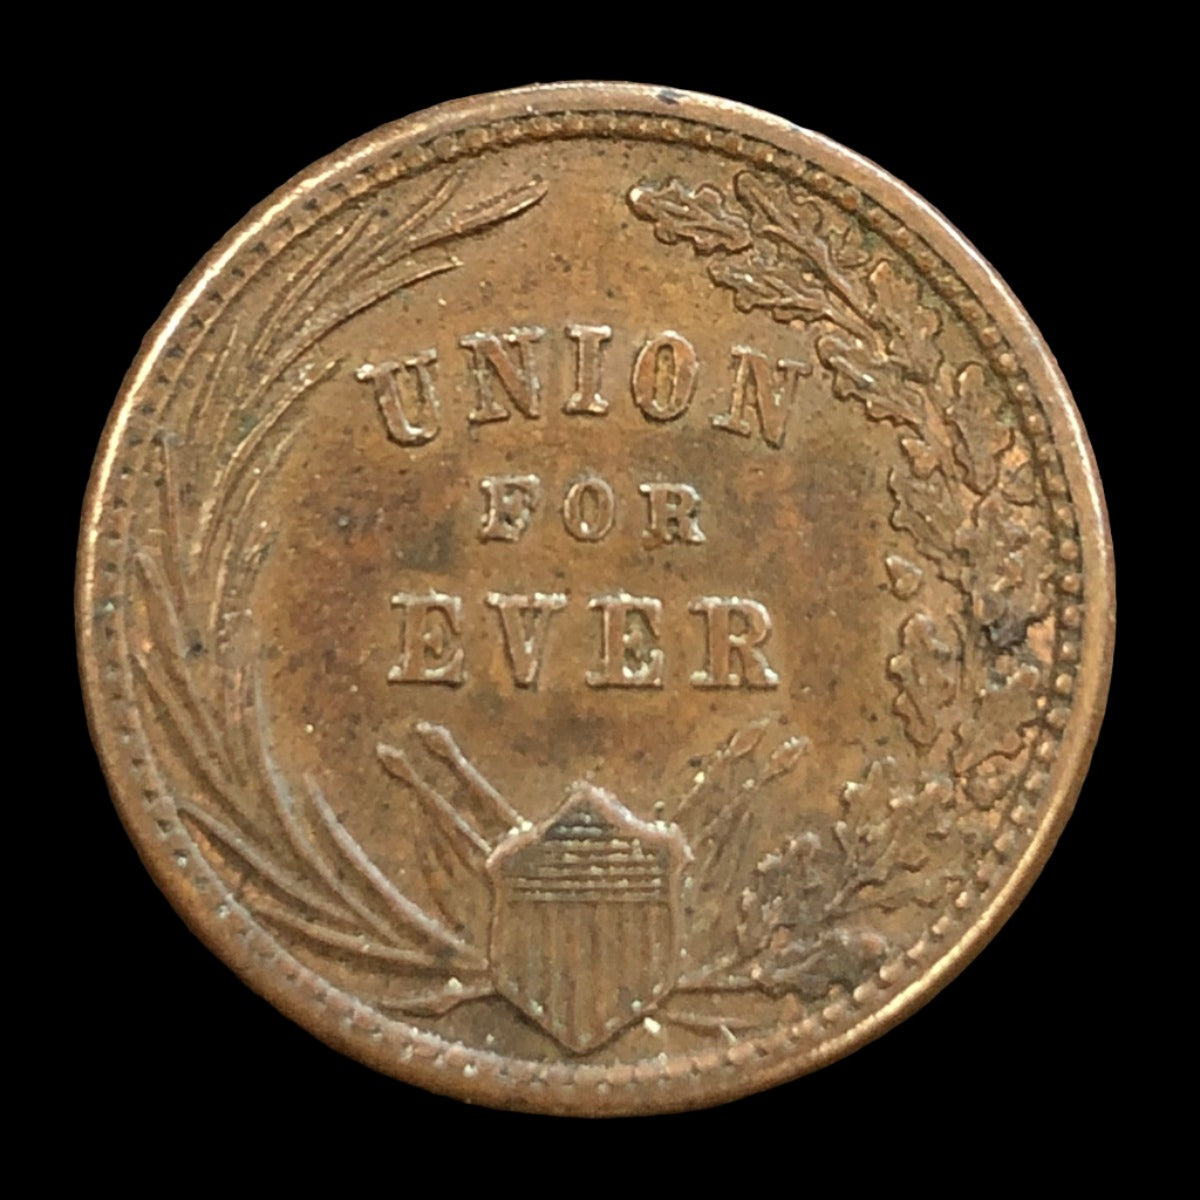 1863 Civil War Token “First in War, First in Peace / Union For Ever”